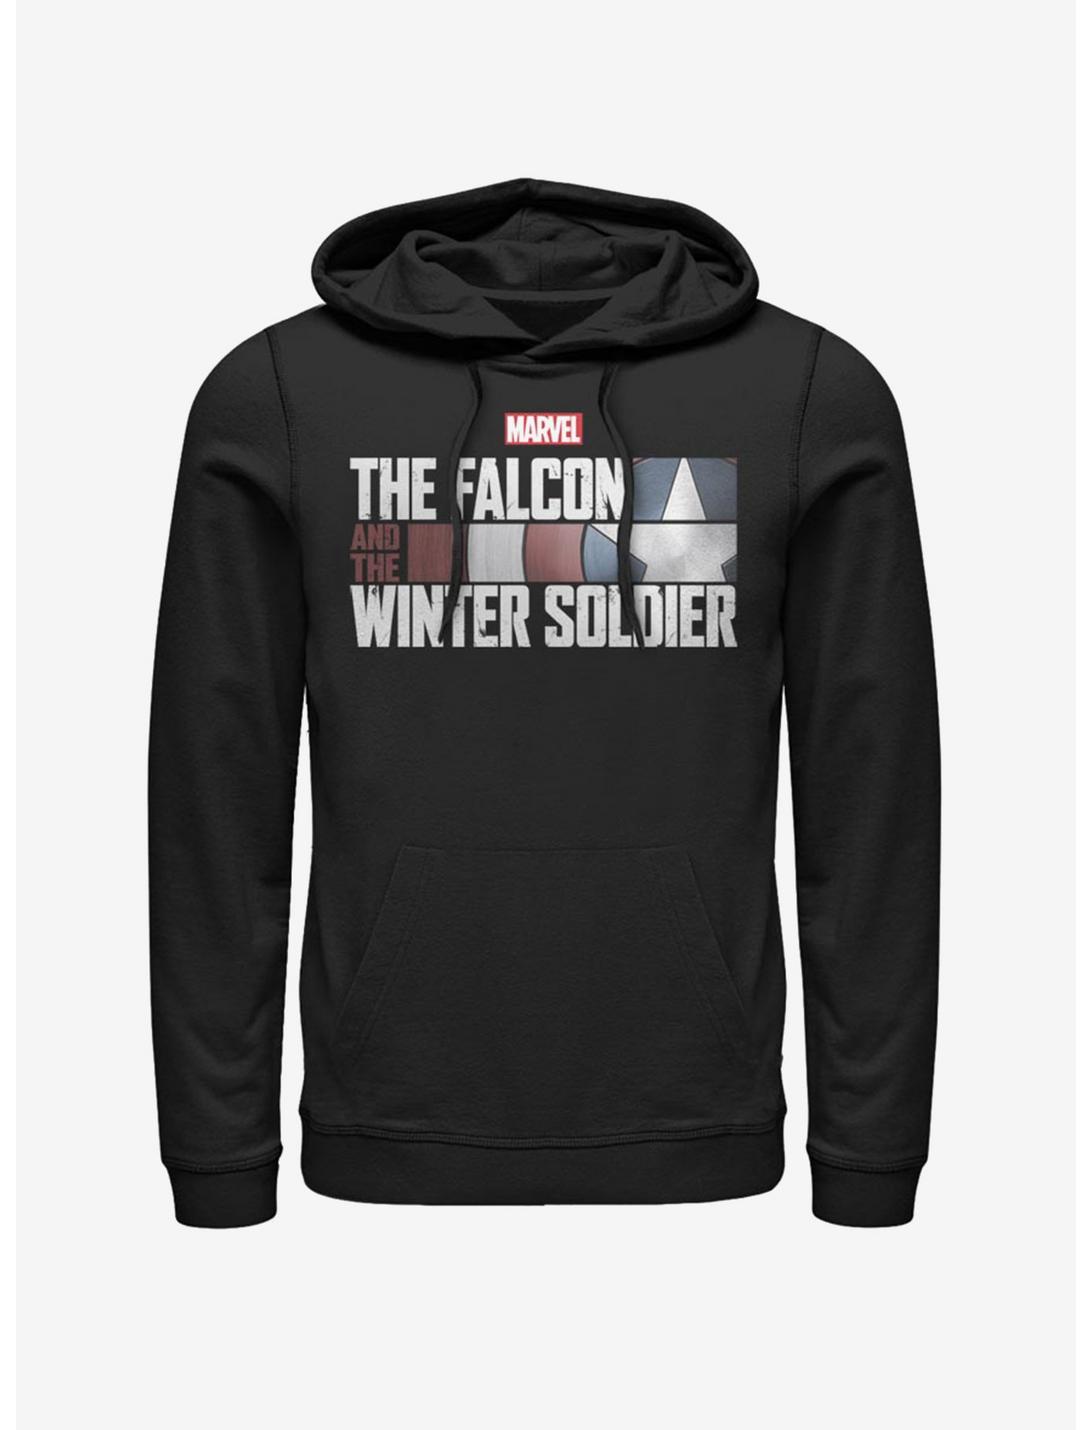 Marvel The Falcon And The Winter Soldier Hoodie, BLACK, hi-res